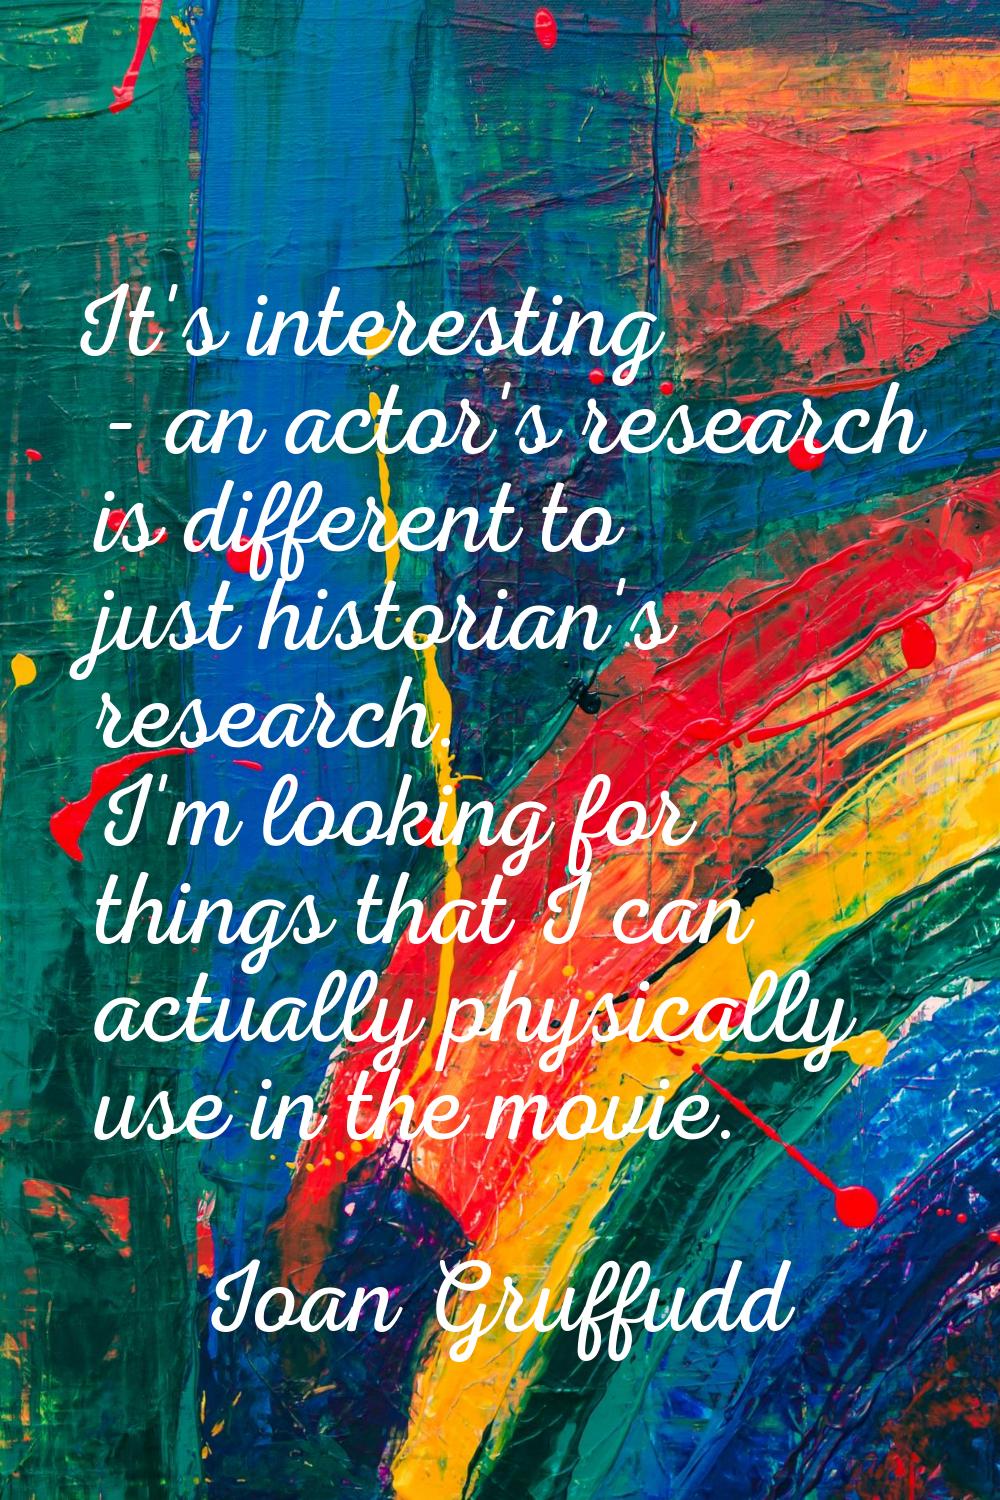 It's interesting - an actor's research is different to just historian's research. I'm looking for t